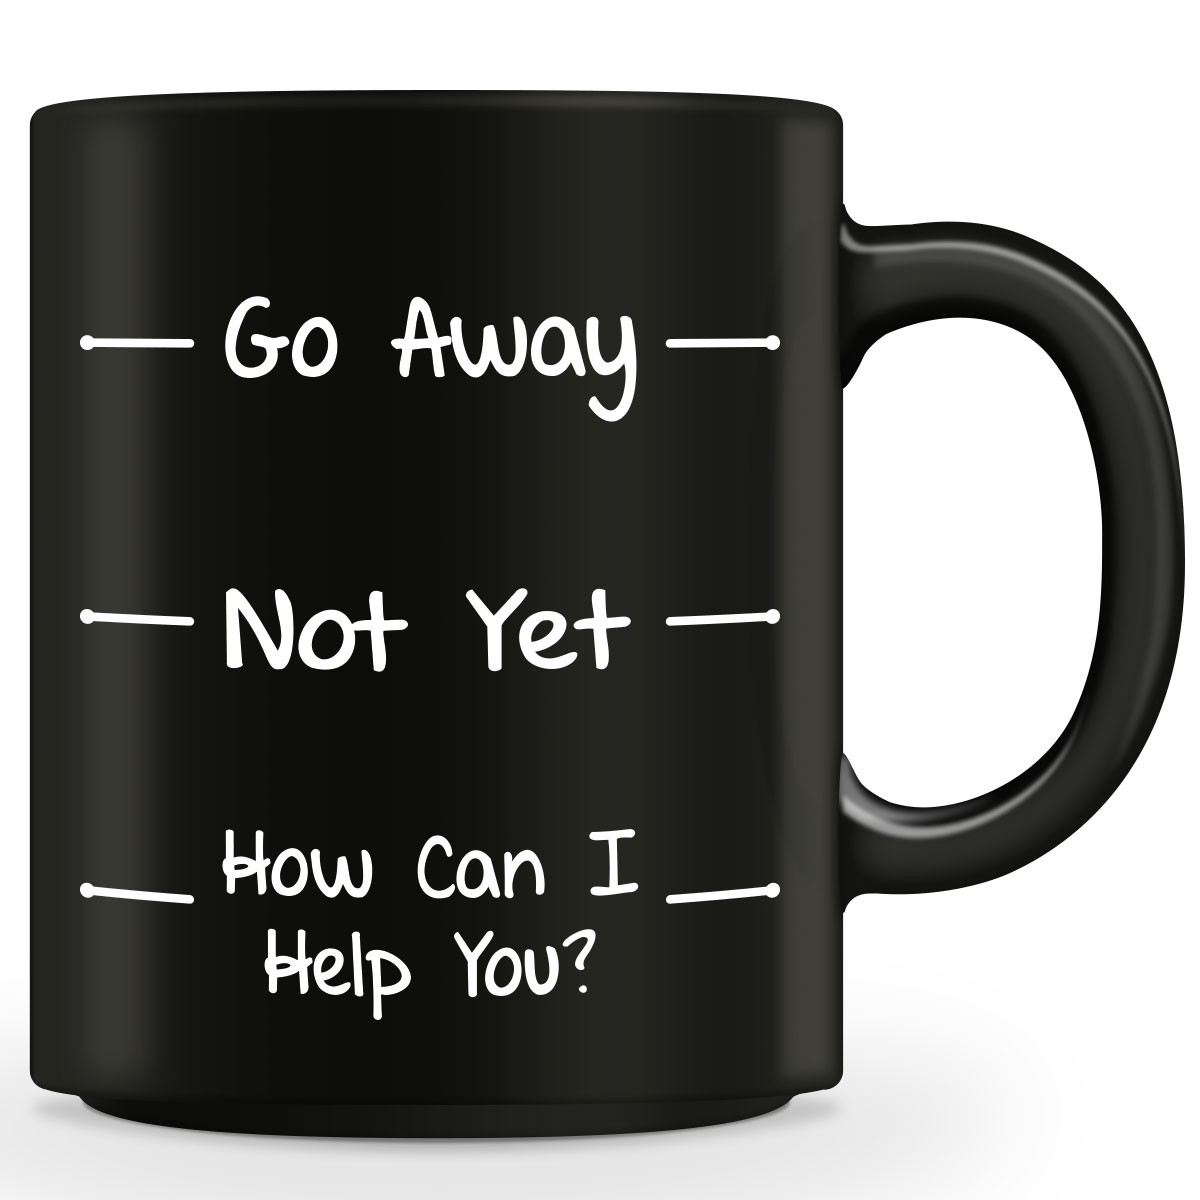 "Go Away, Not Yet, How Can I Help You" Funny Mug